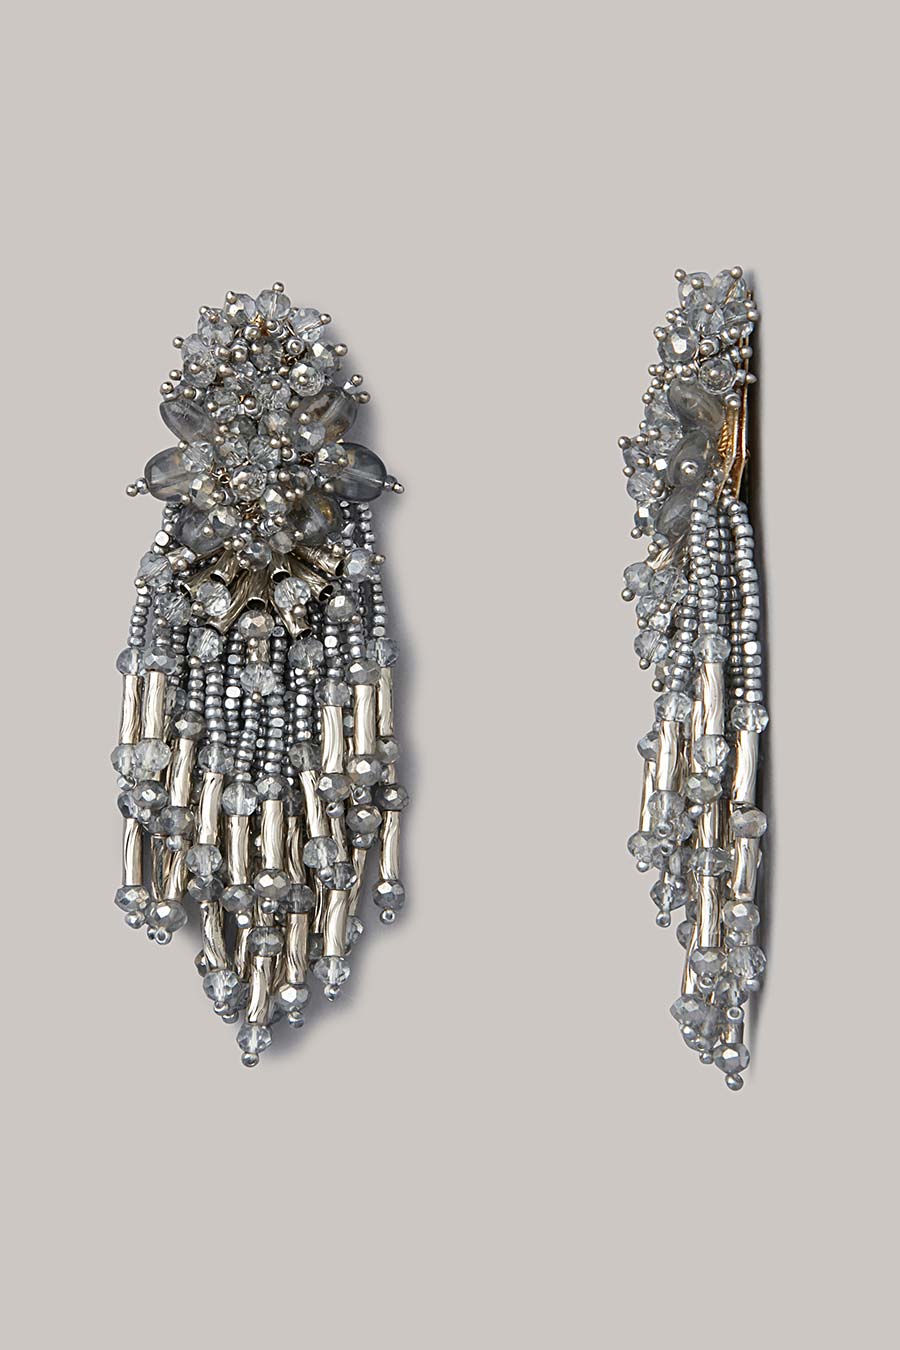 Dark Grey and Silver Crystal Chandelier Earrings by DUBLOS – JJ Caprices